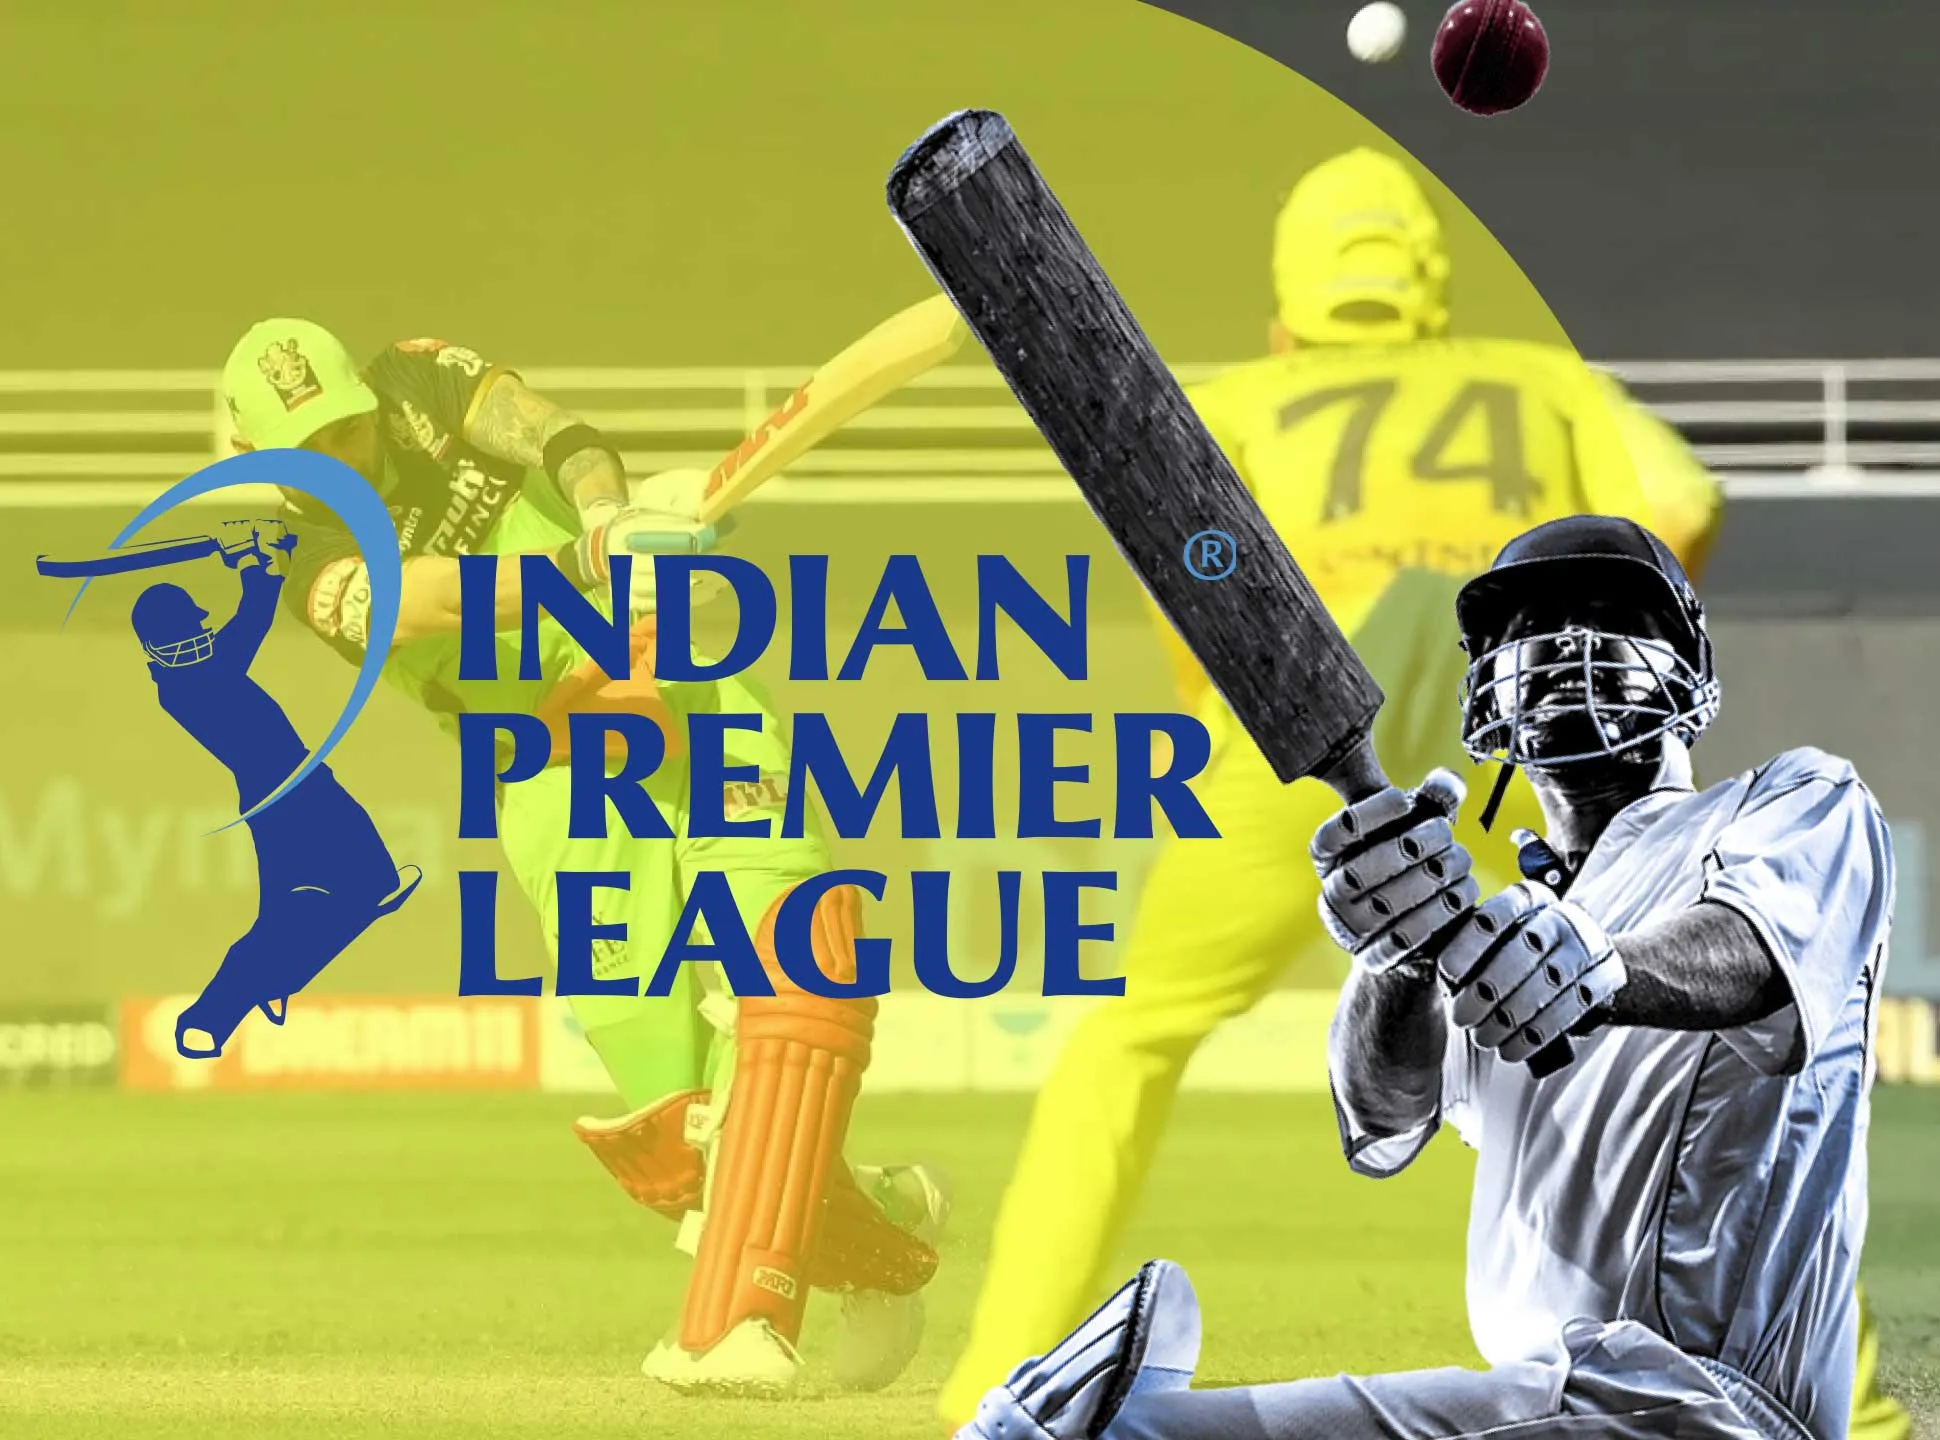 Indian Premiere League is the most popular cricket league in India.